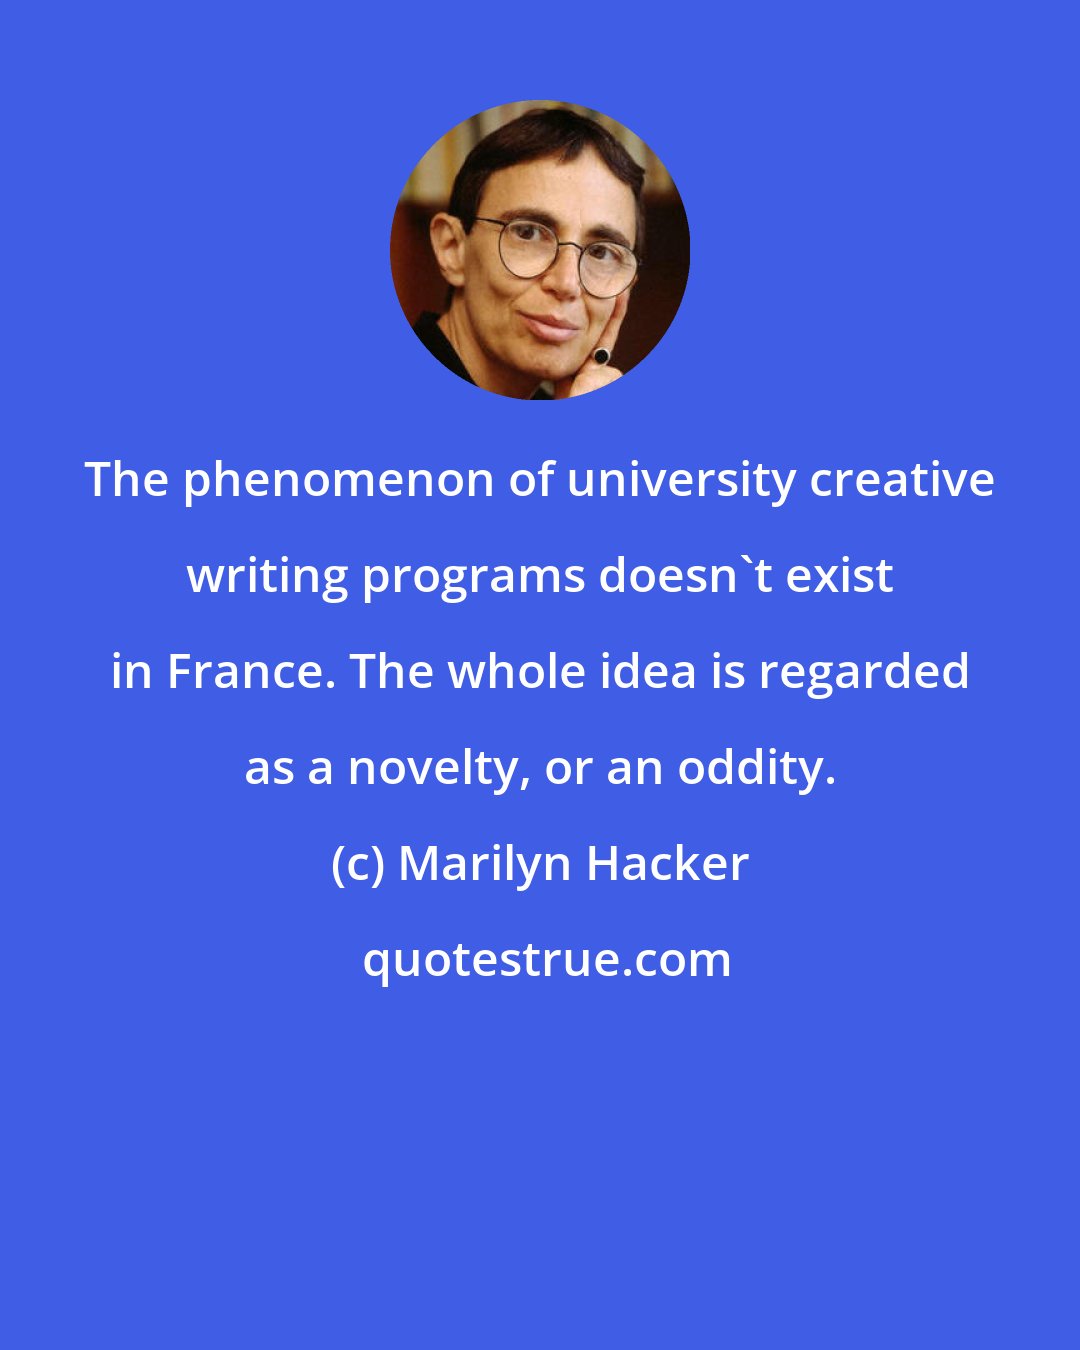 Marilyn Hacker: The phenomenon of university creative writing programs doesn't exist in France. The whole idea is regarded as a novelty, or an oddity.